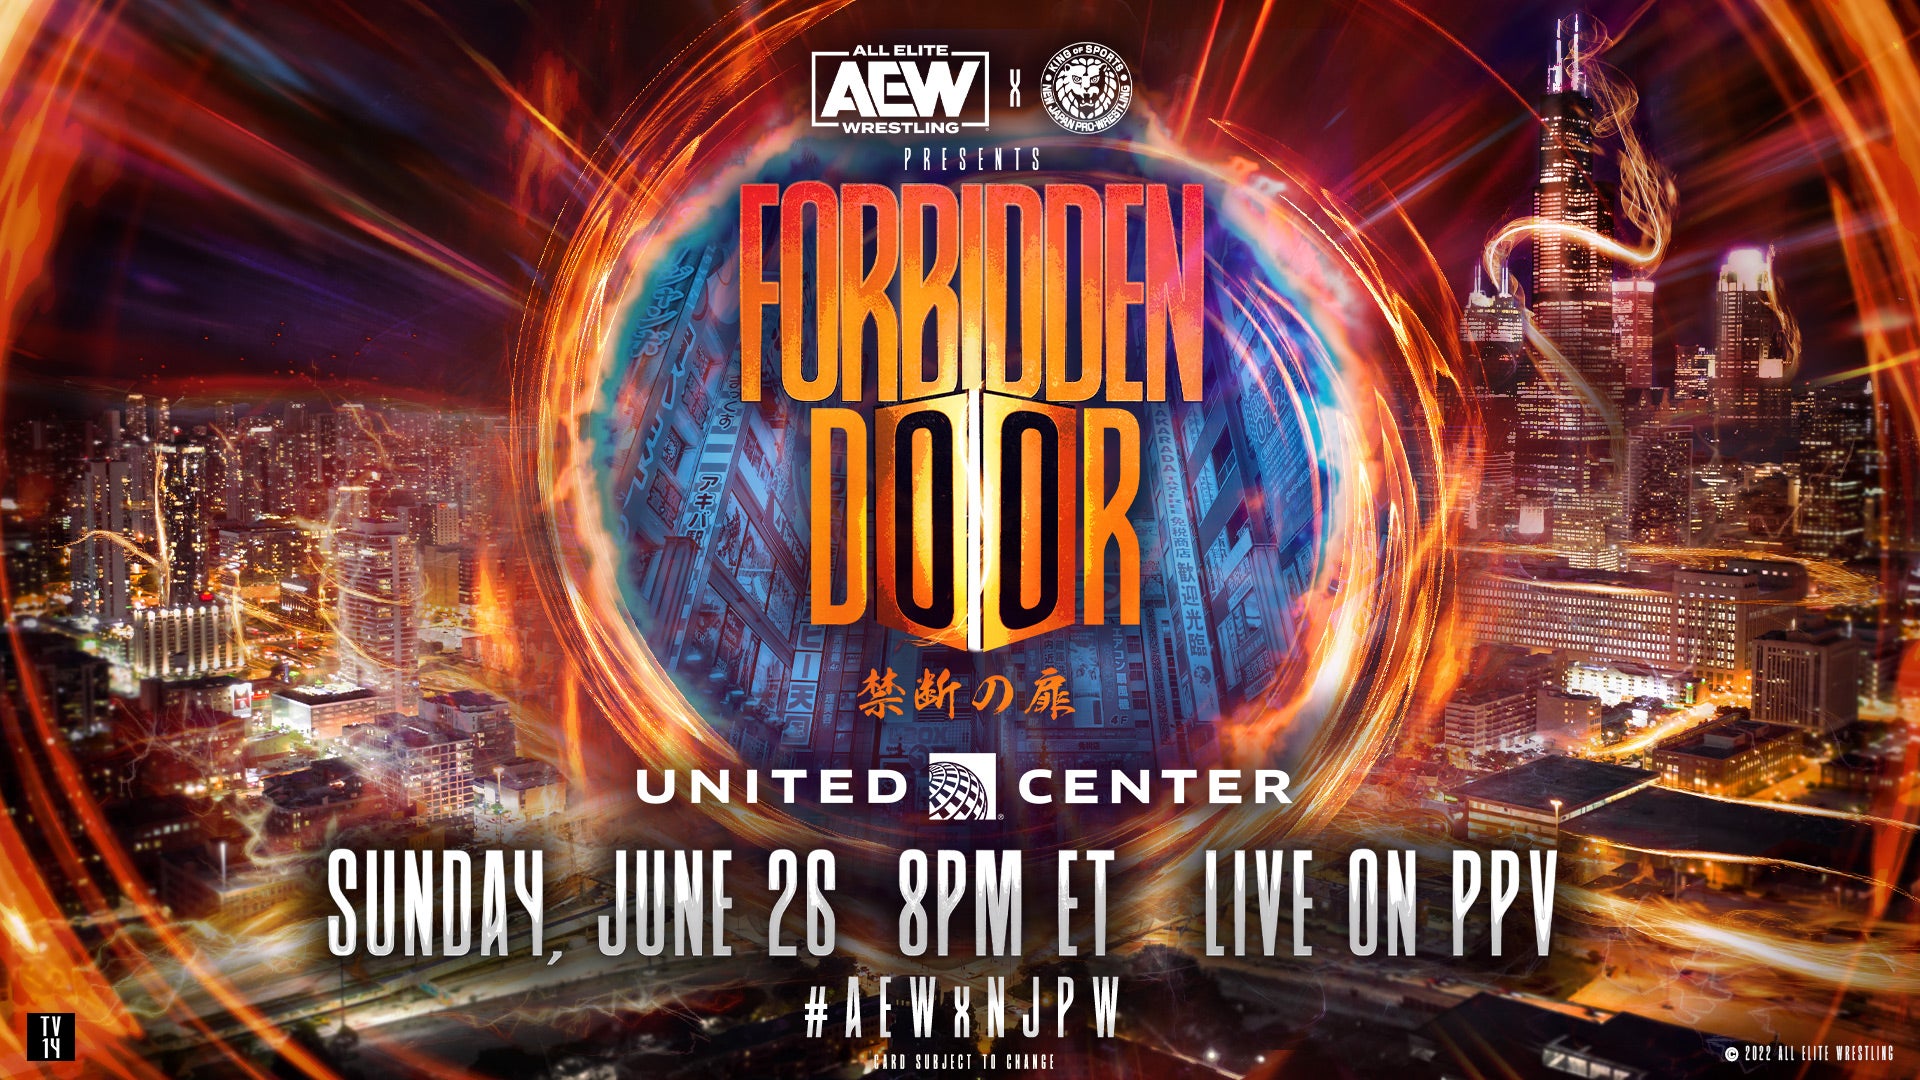 AEW Forbidden Door 2022 When do tickets go on sale for the United